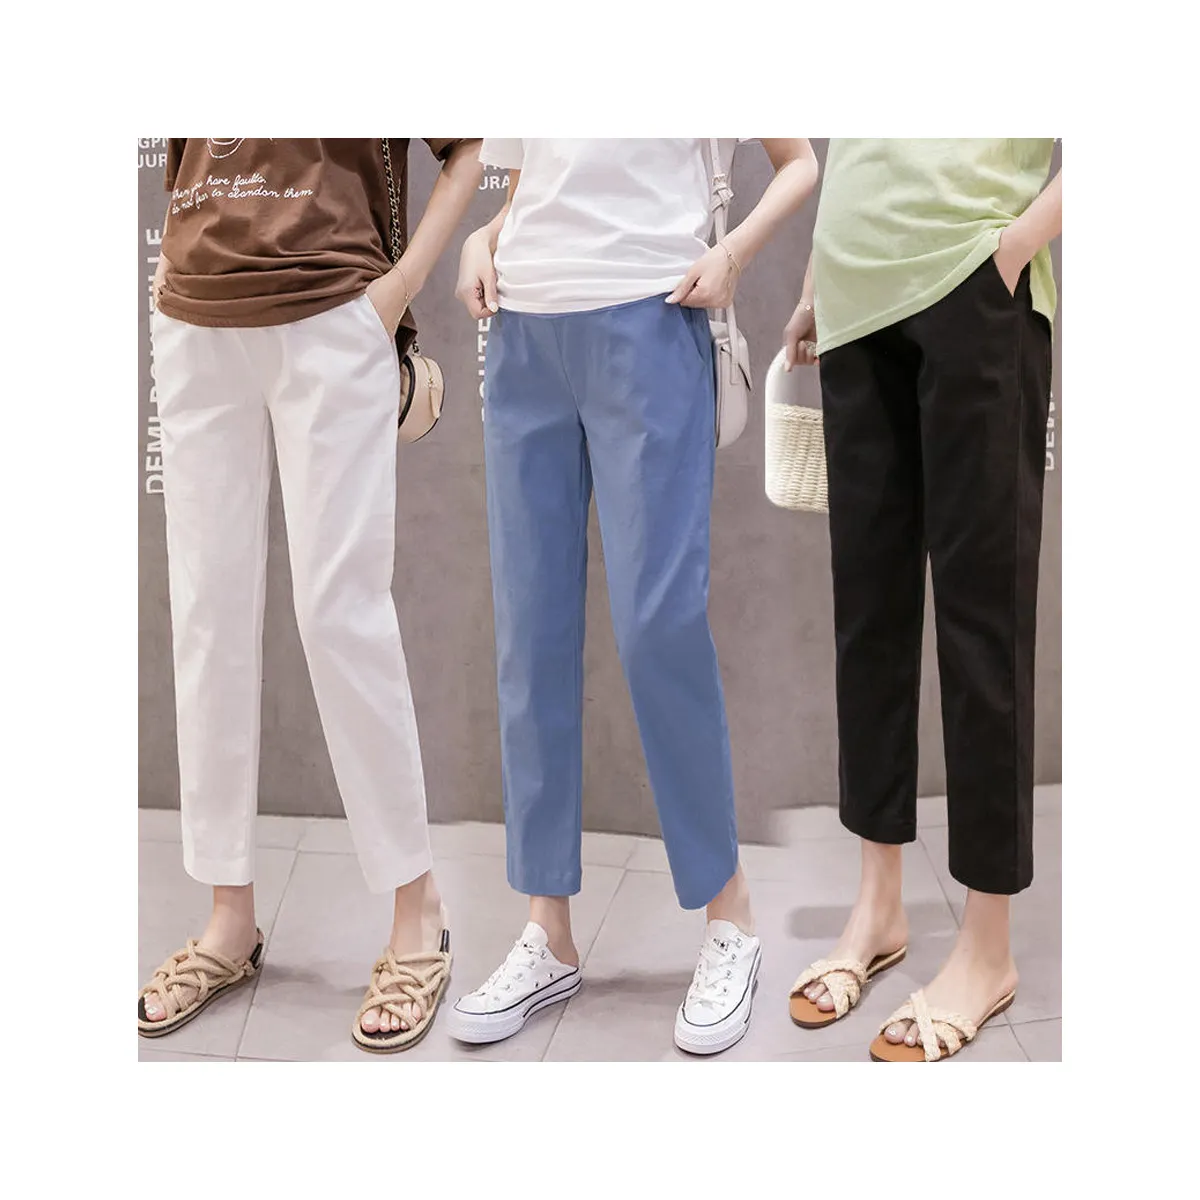 Top quality Pregnant Women Empire Pants Mid-Calf Maternity Belly Trousers Office Lady Elegant Pants